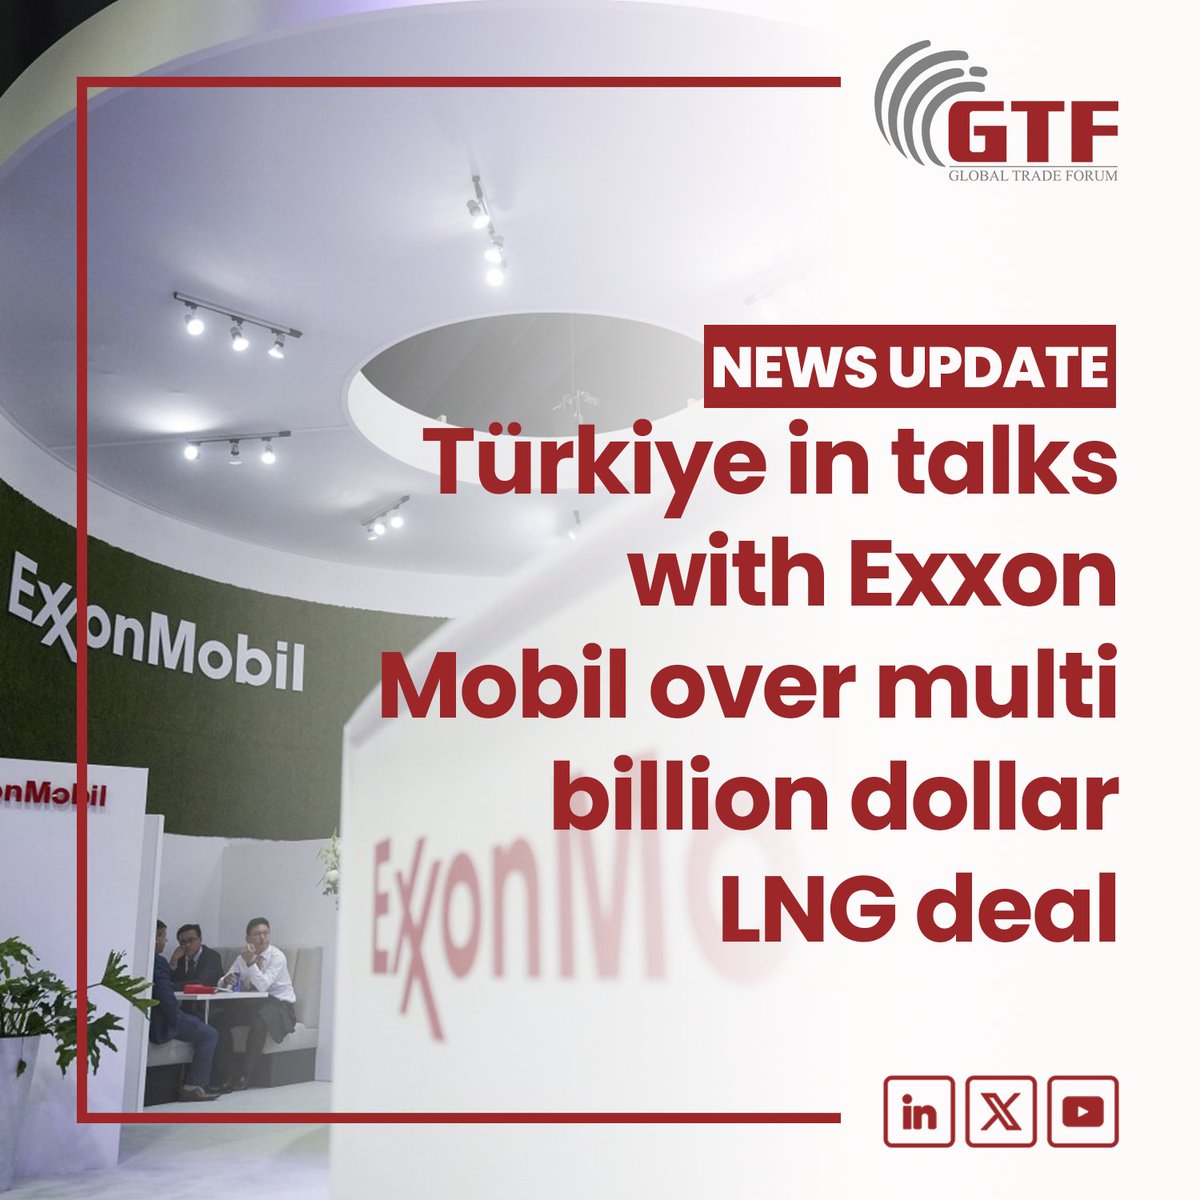 Türkiye is in talks with U.S. energy giant ExxonMobil over a multibillion-dollar deal to buy liquefied natural gas (LNG), in an effort to curb its dependence on Russian energy, according to a Financial Times report on Sunday.

#TürkiyeTrade #GTF2024 #GlobalTradeForum